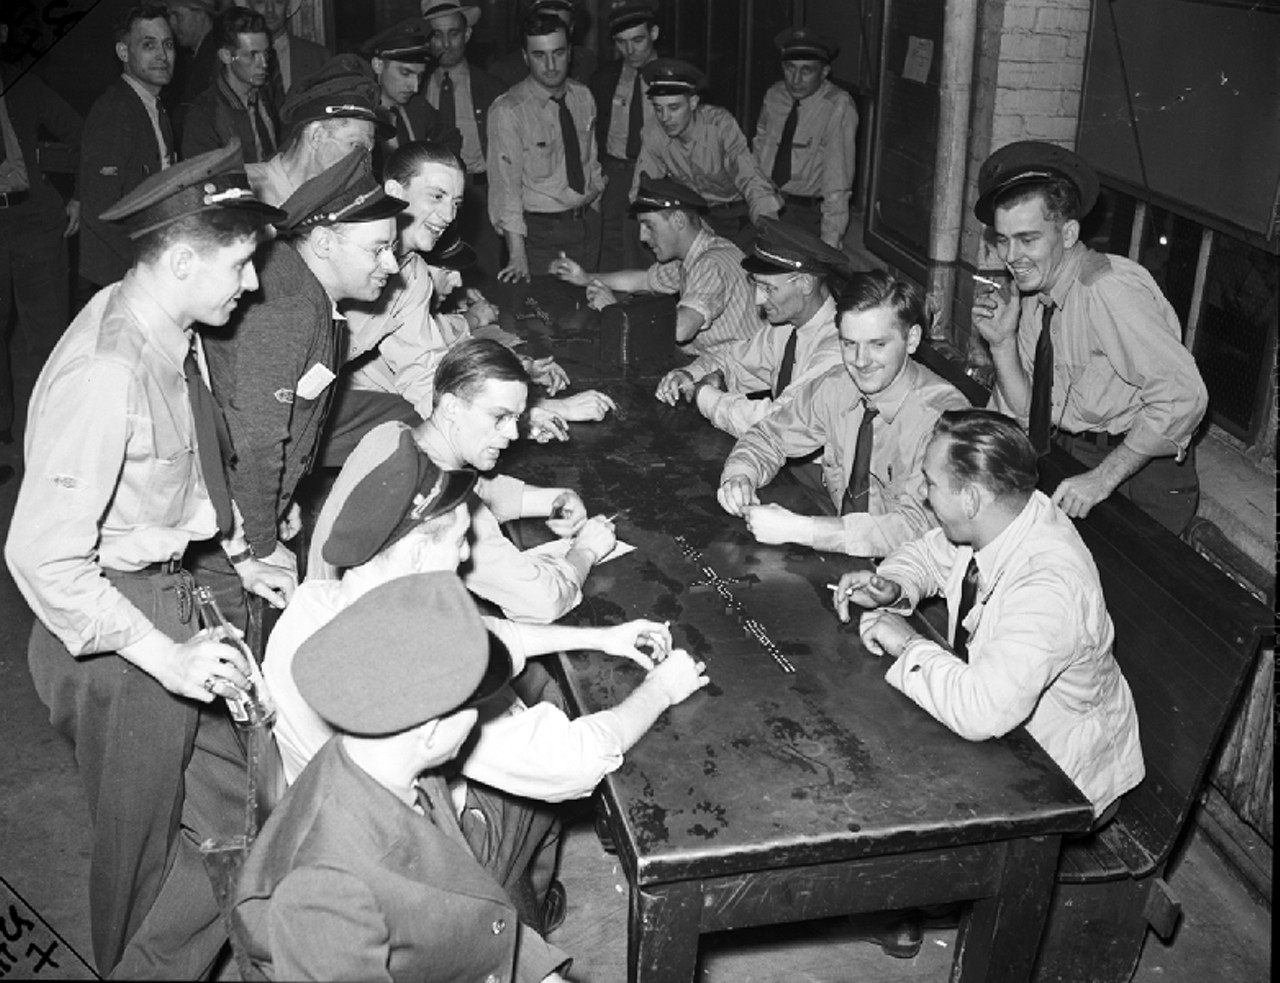 Nonetheless, the DSR&#146;s employees were as militant as any other Detroit working people during the union fever of the late 1930s and early 1940s. In this photograph from 1941, striking street railway workers &#147;gather around table to watch game of dominoes.&#148;